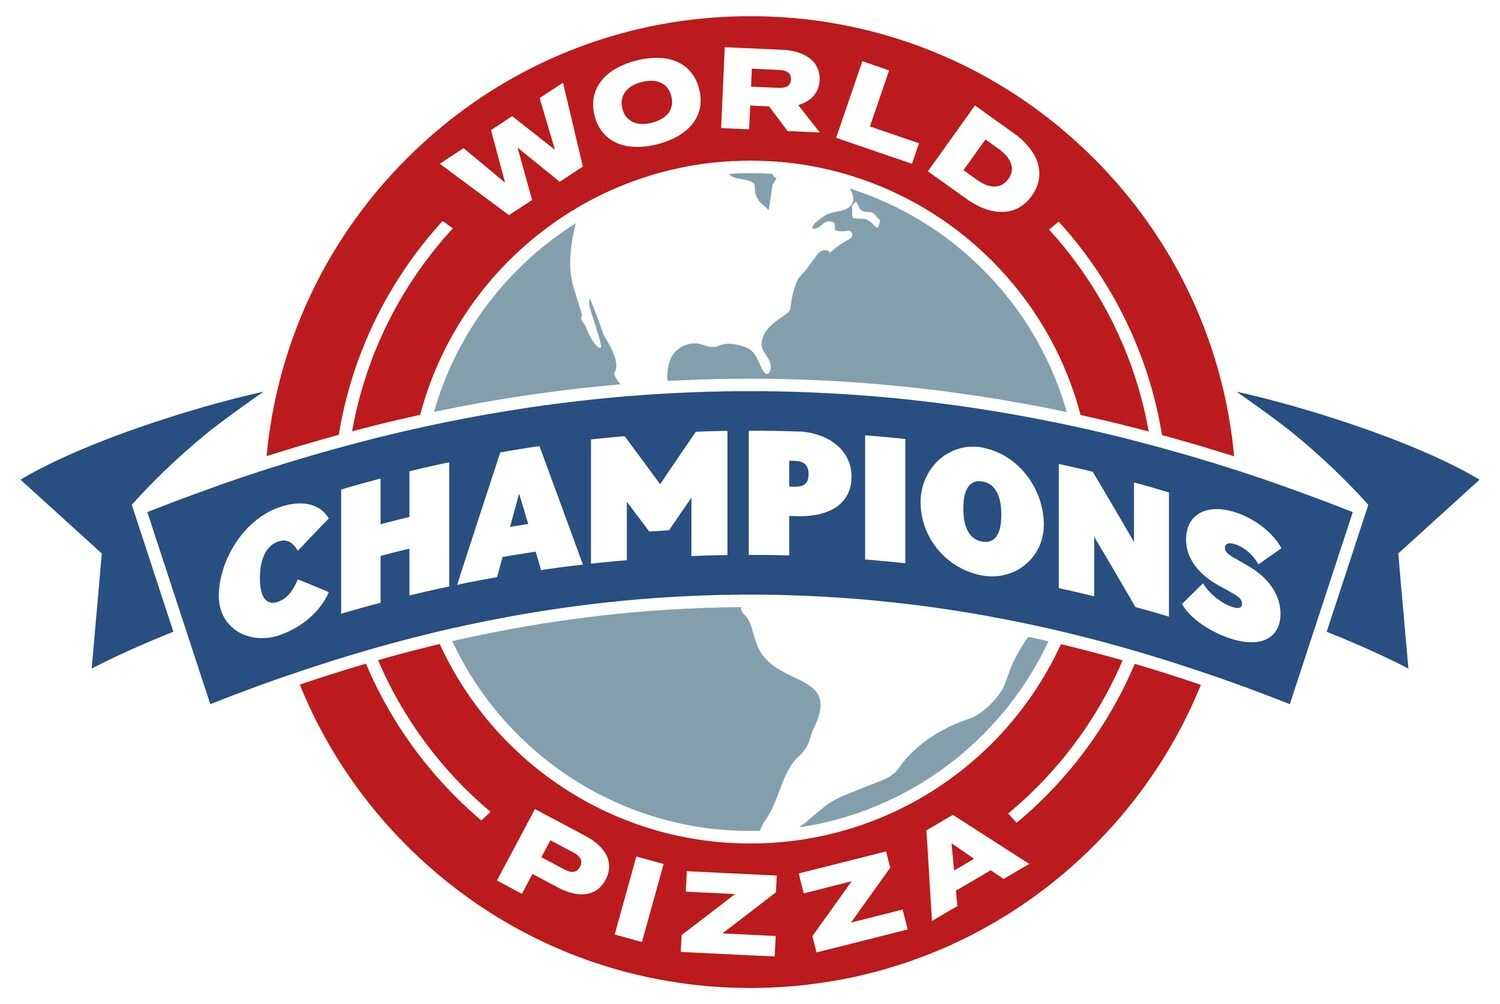 World Pizza Champions™ team is a U.S. based non-profit, multinational group made up of elite pizza professionals. Through international competition, educational outreach, public demonstrations, and community-based service the team is dedicated to promoting pizza making as a respected craft and viable career choice. Learn more at WorldPizzaChampions.com.